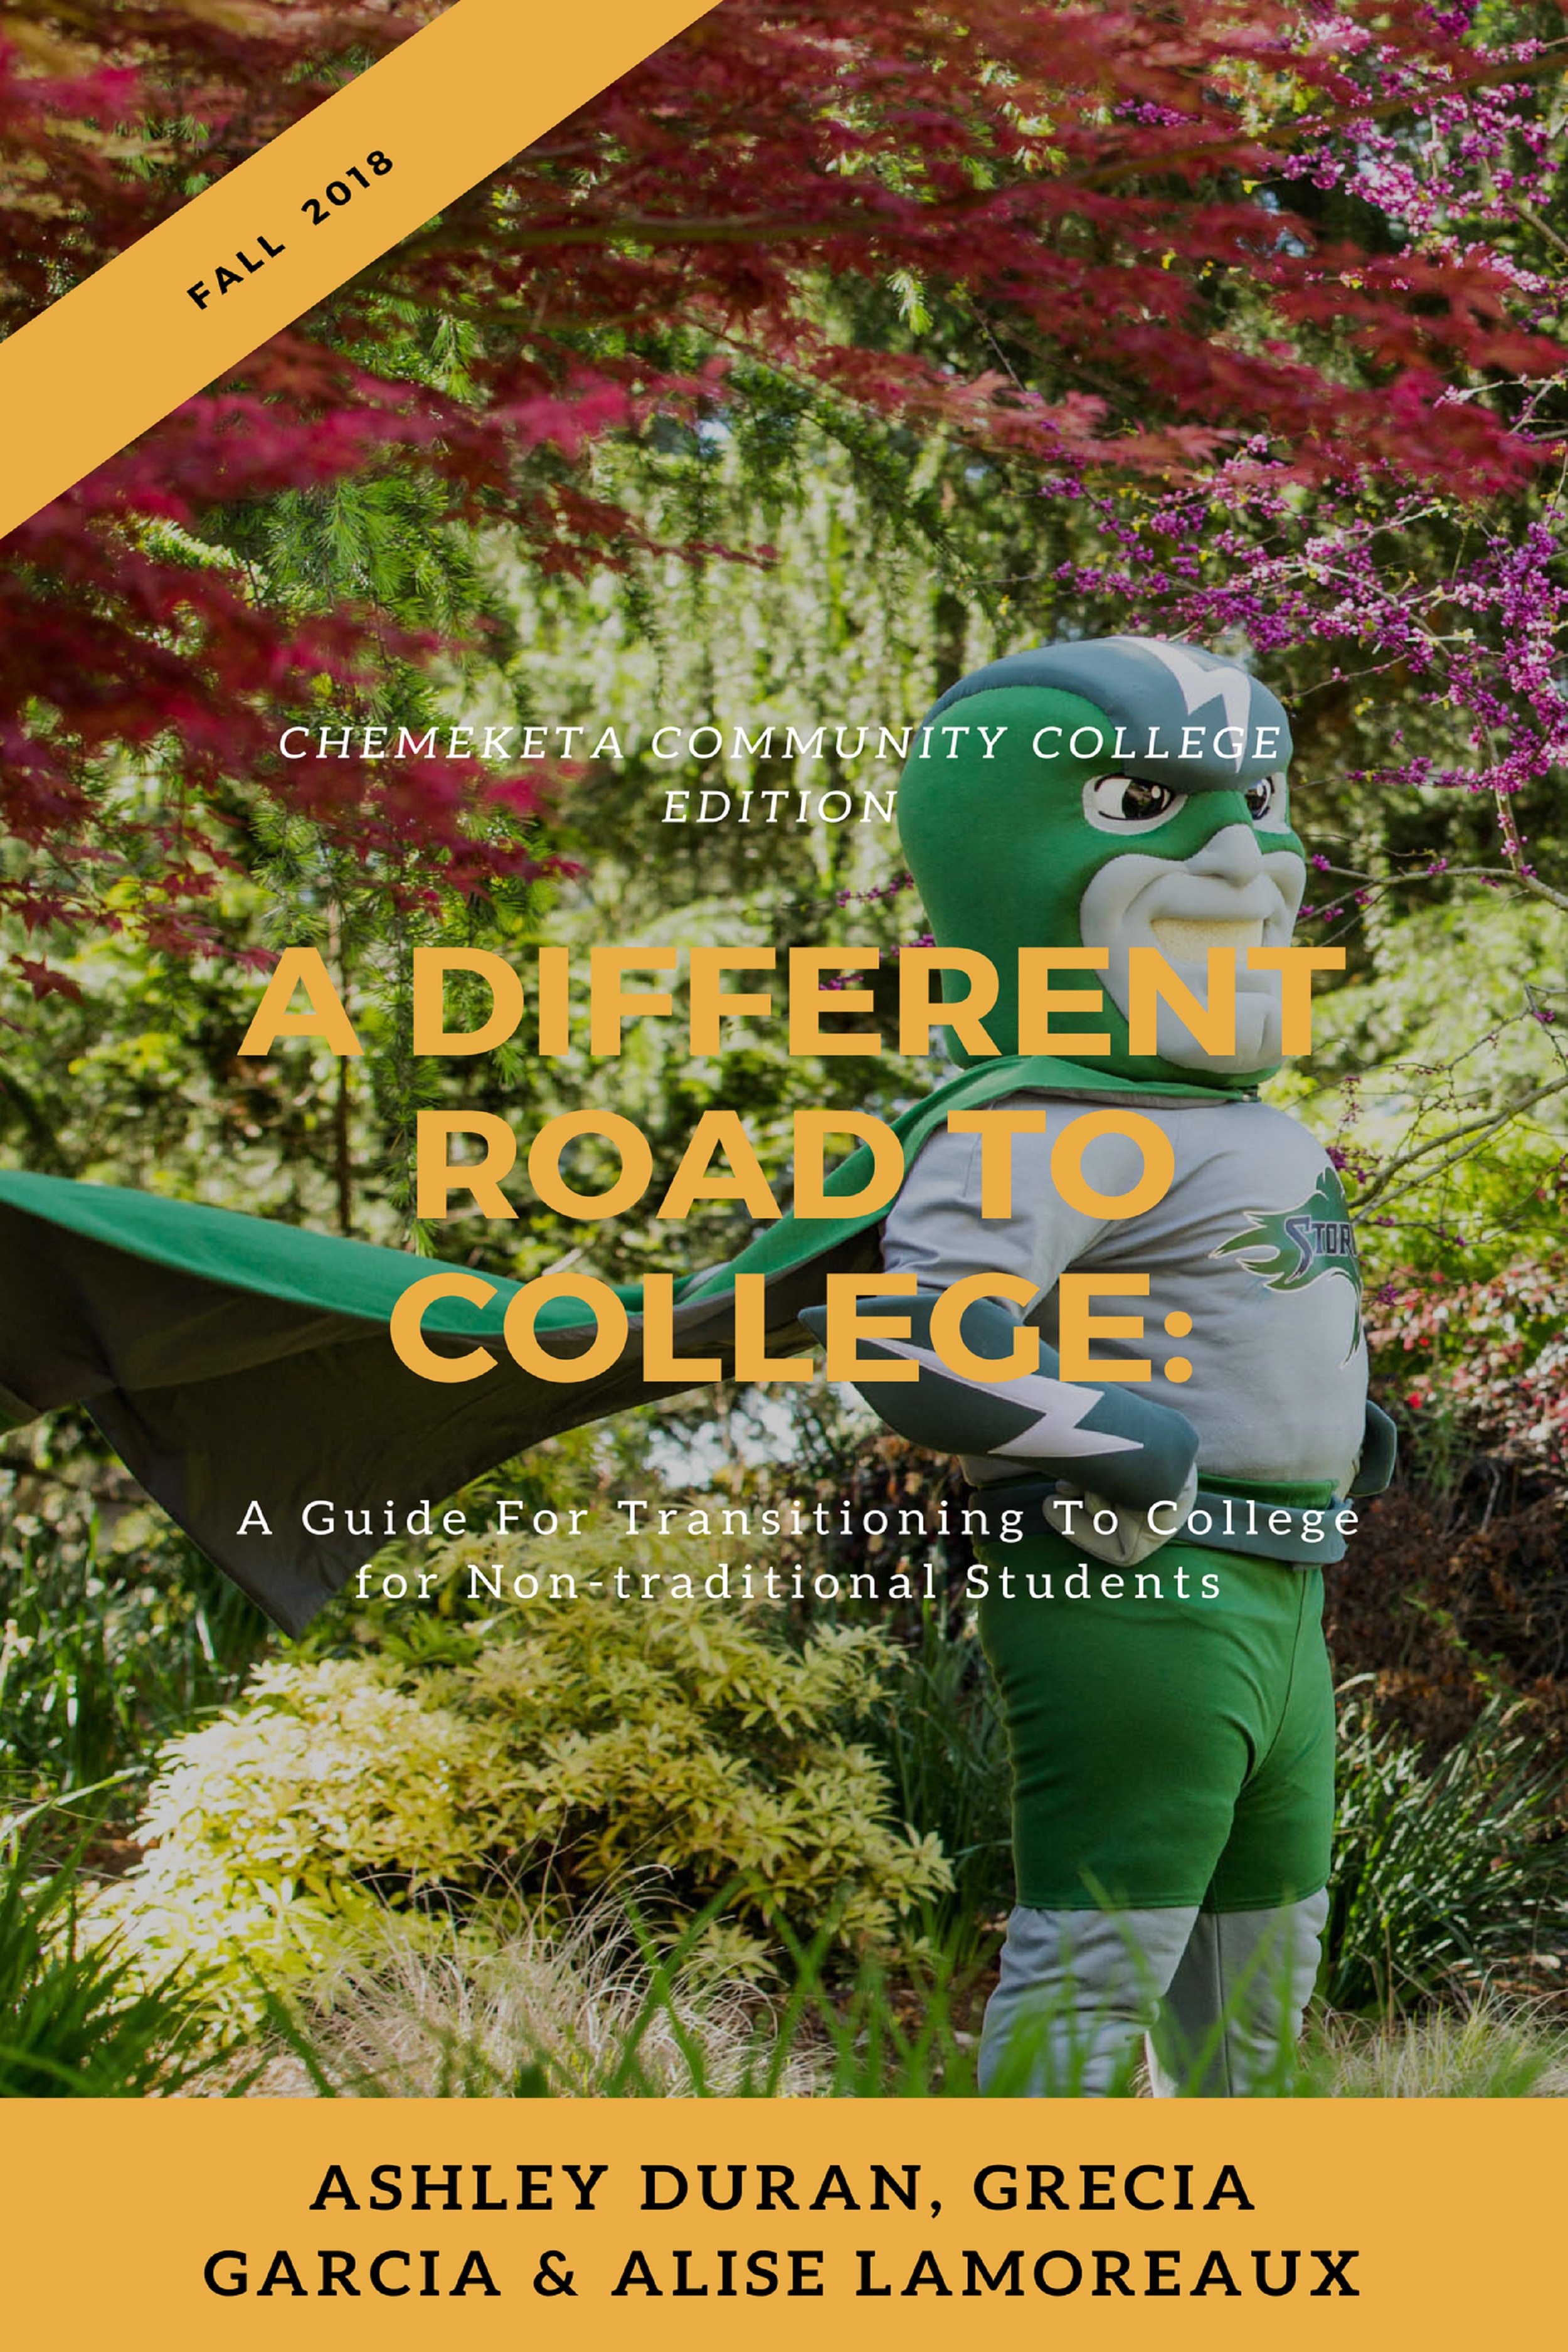 Book cover for "A Different Road to College"